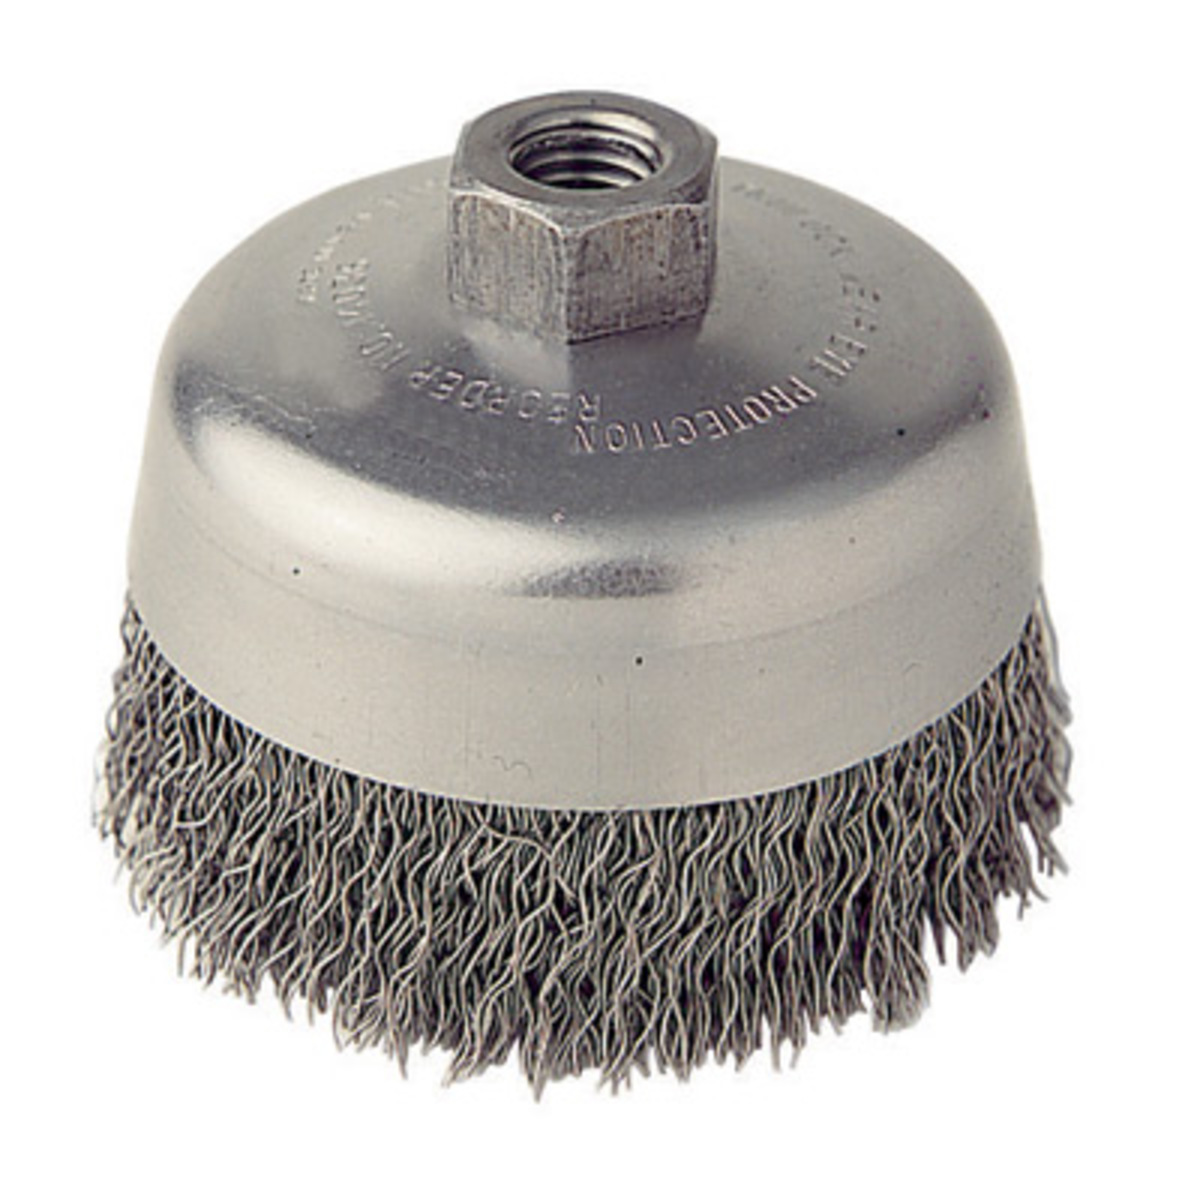 Crimped Wire-Wire Wheel Cup Brush – Industrial Tool Supply